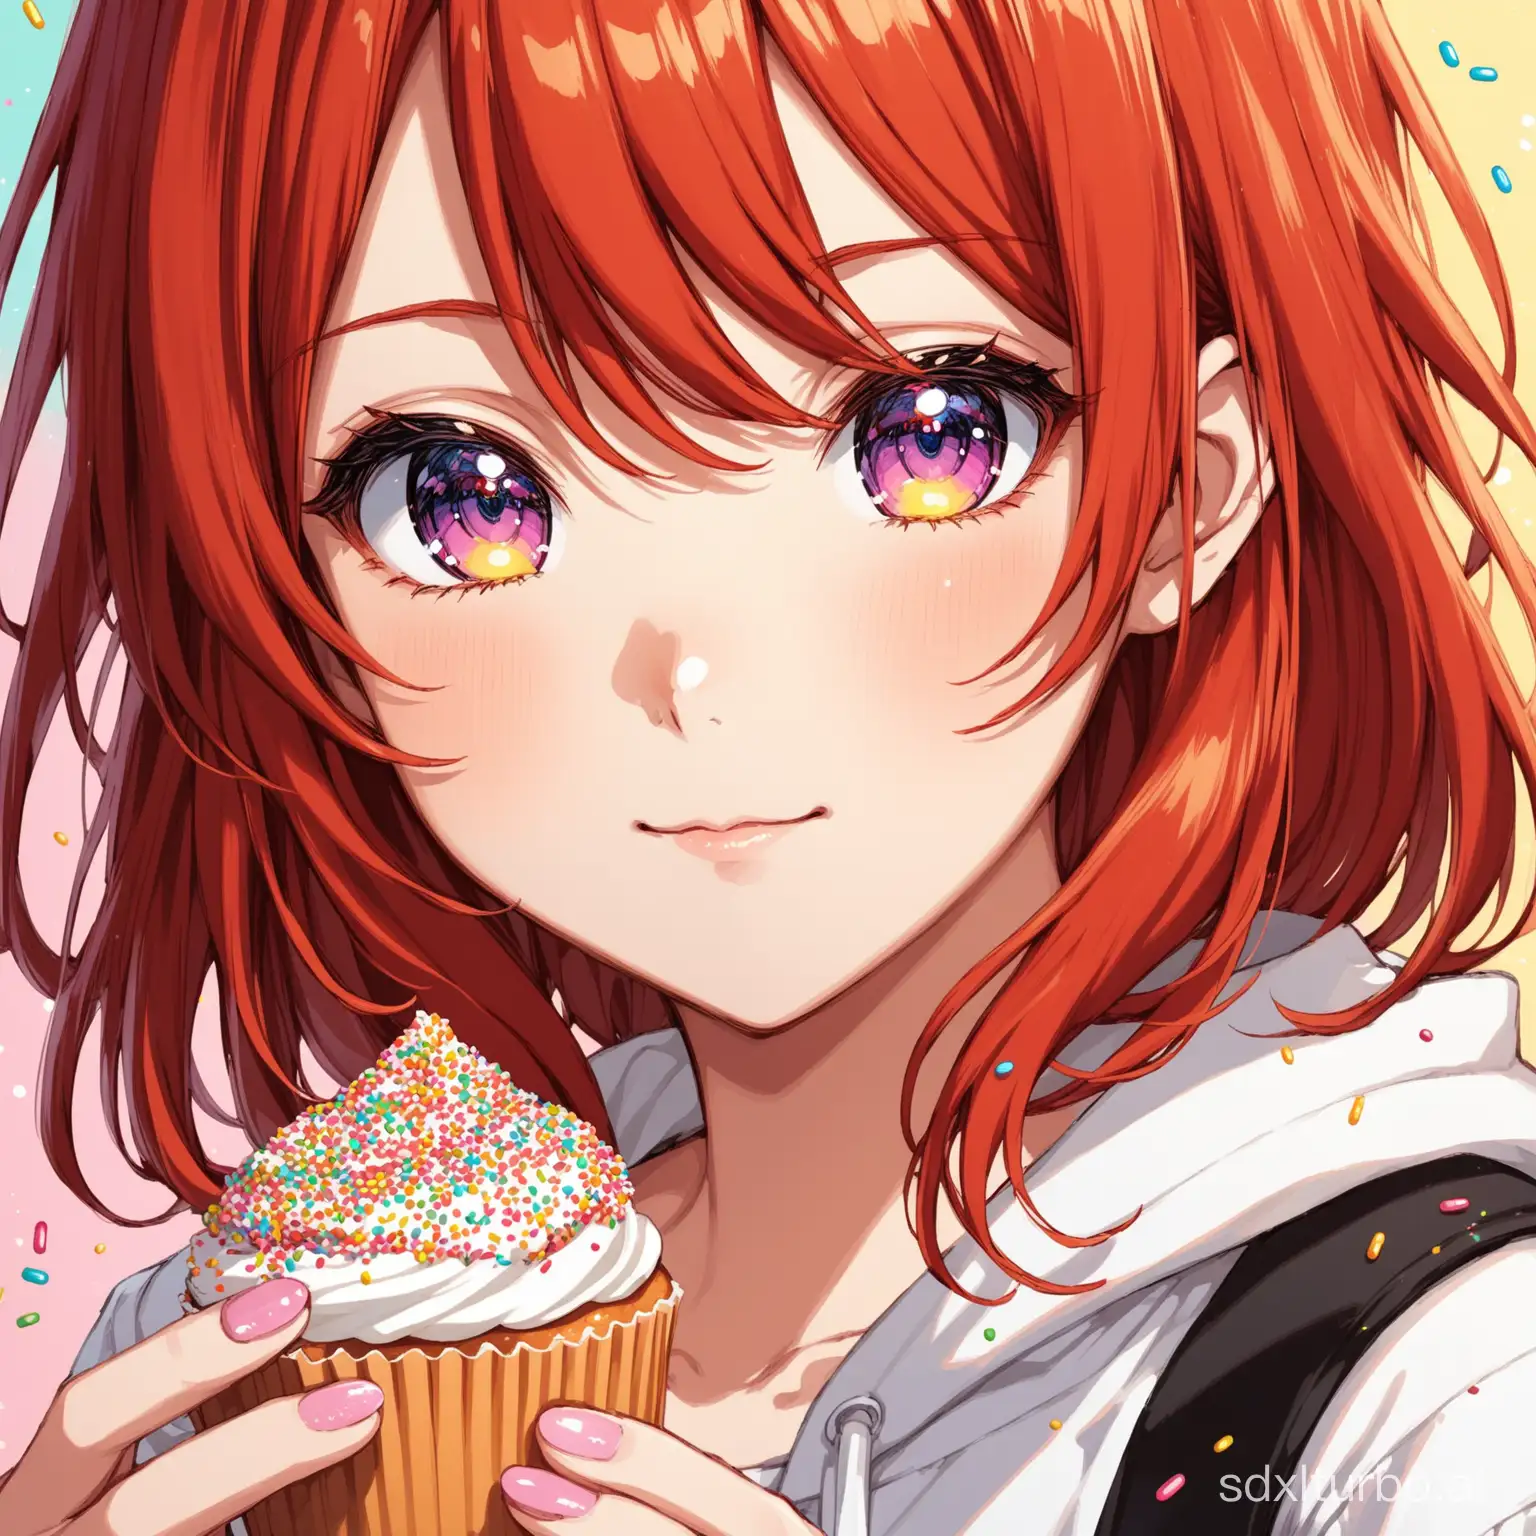 redhead anime girl with sprinkles, portrait